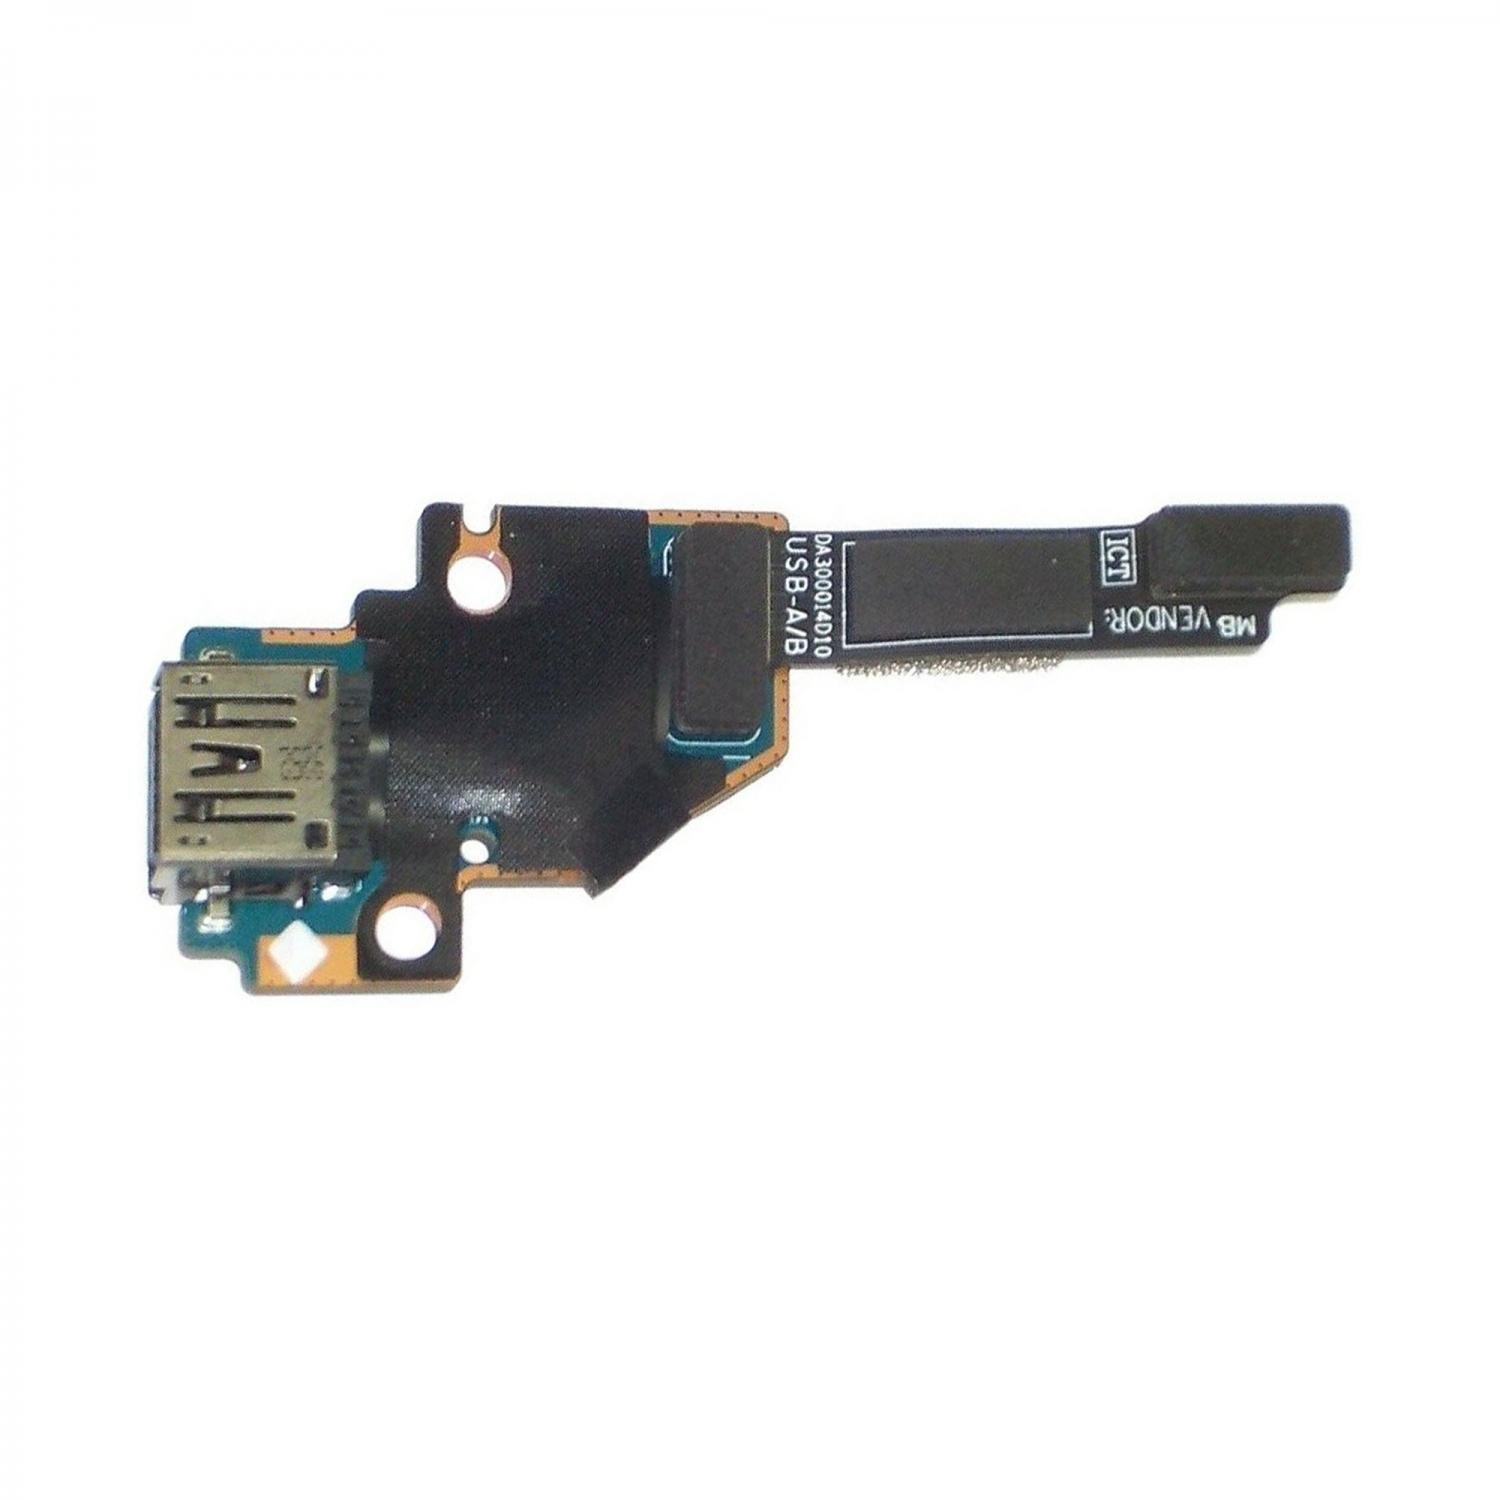 Dell Latitude 7200 2in1 OEM IO Daughter Circuit Board with USB / Cable P/N HUF06, CYPWC